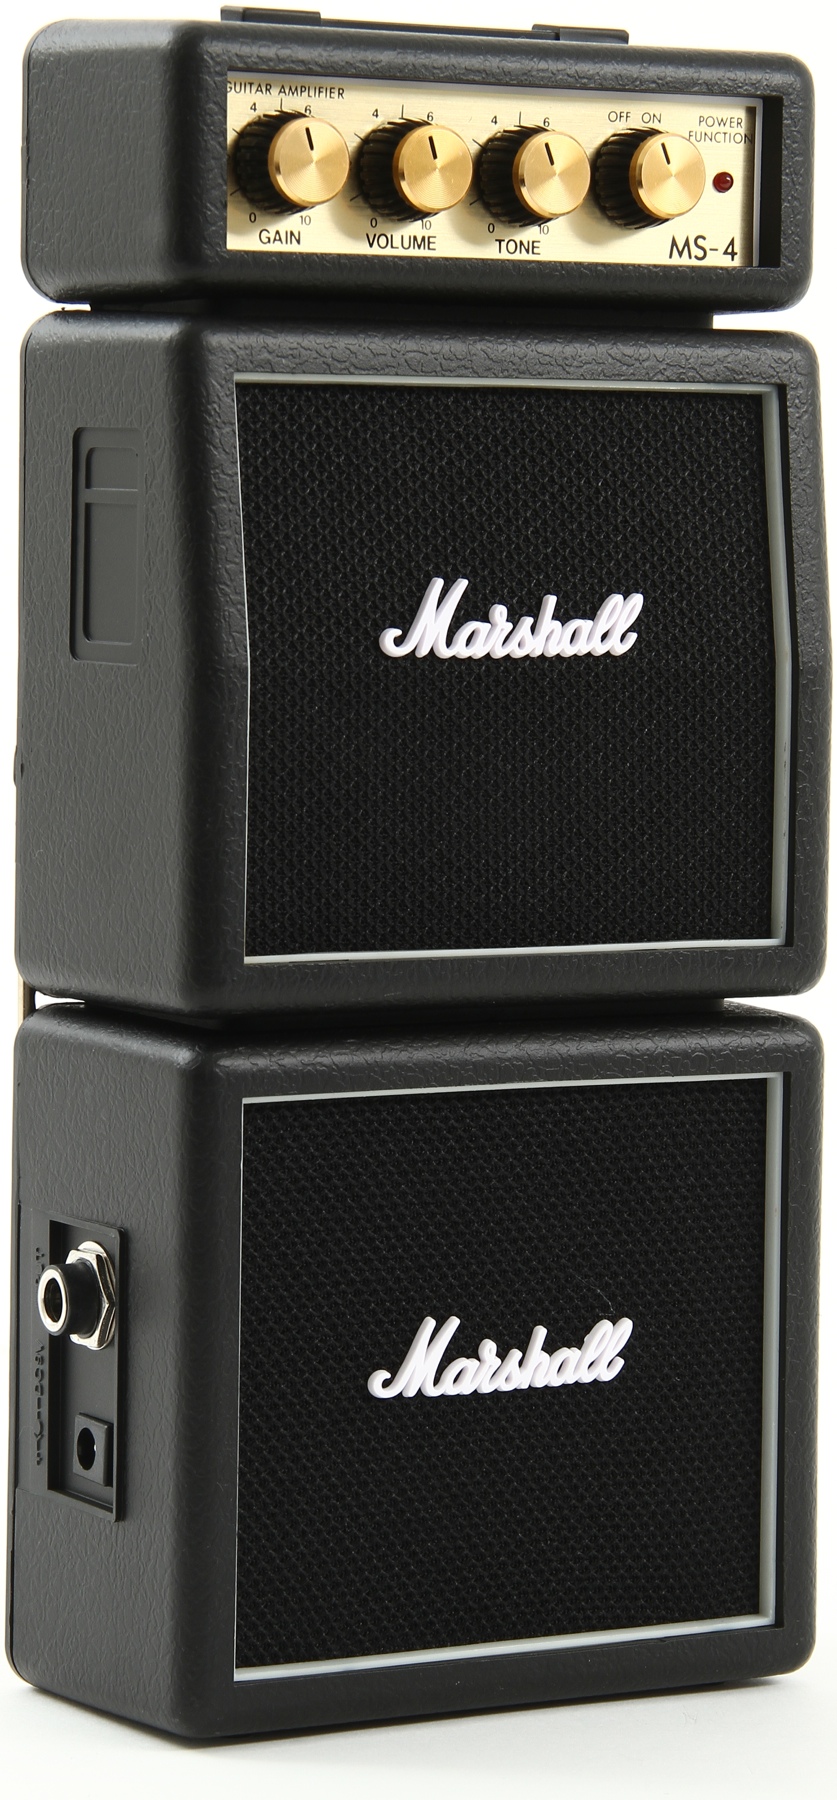 MS4 marshall micro double stack amplifier